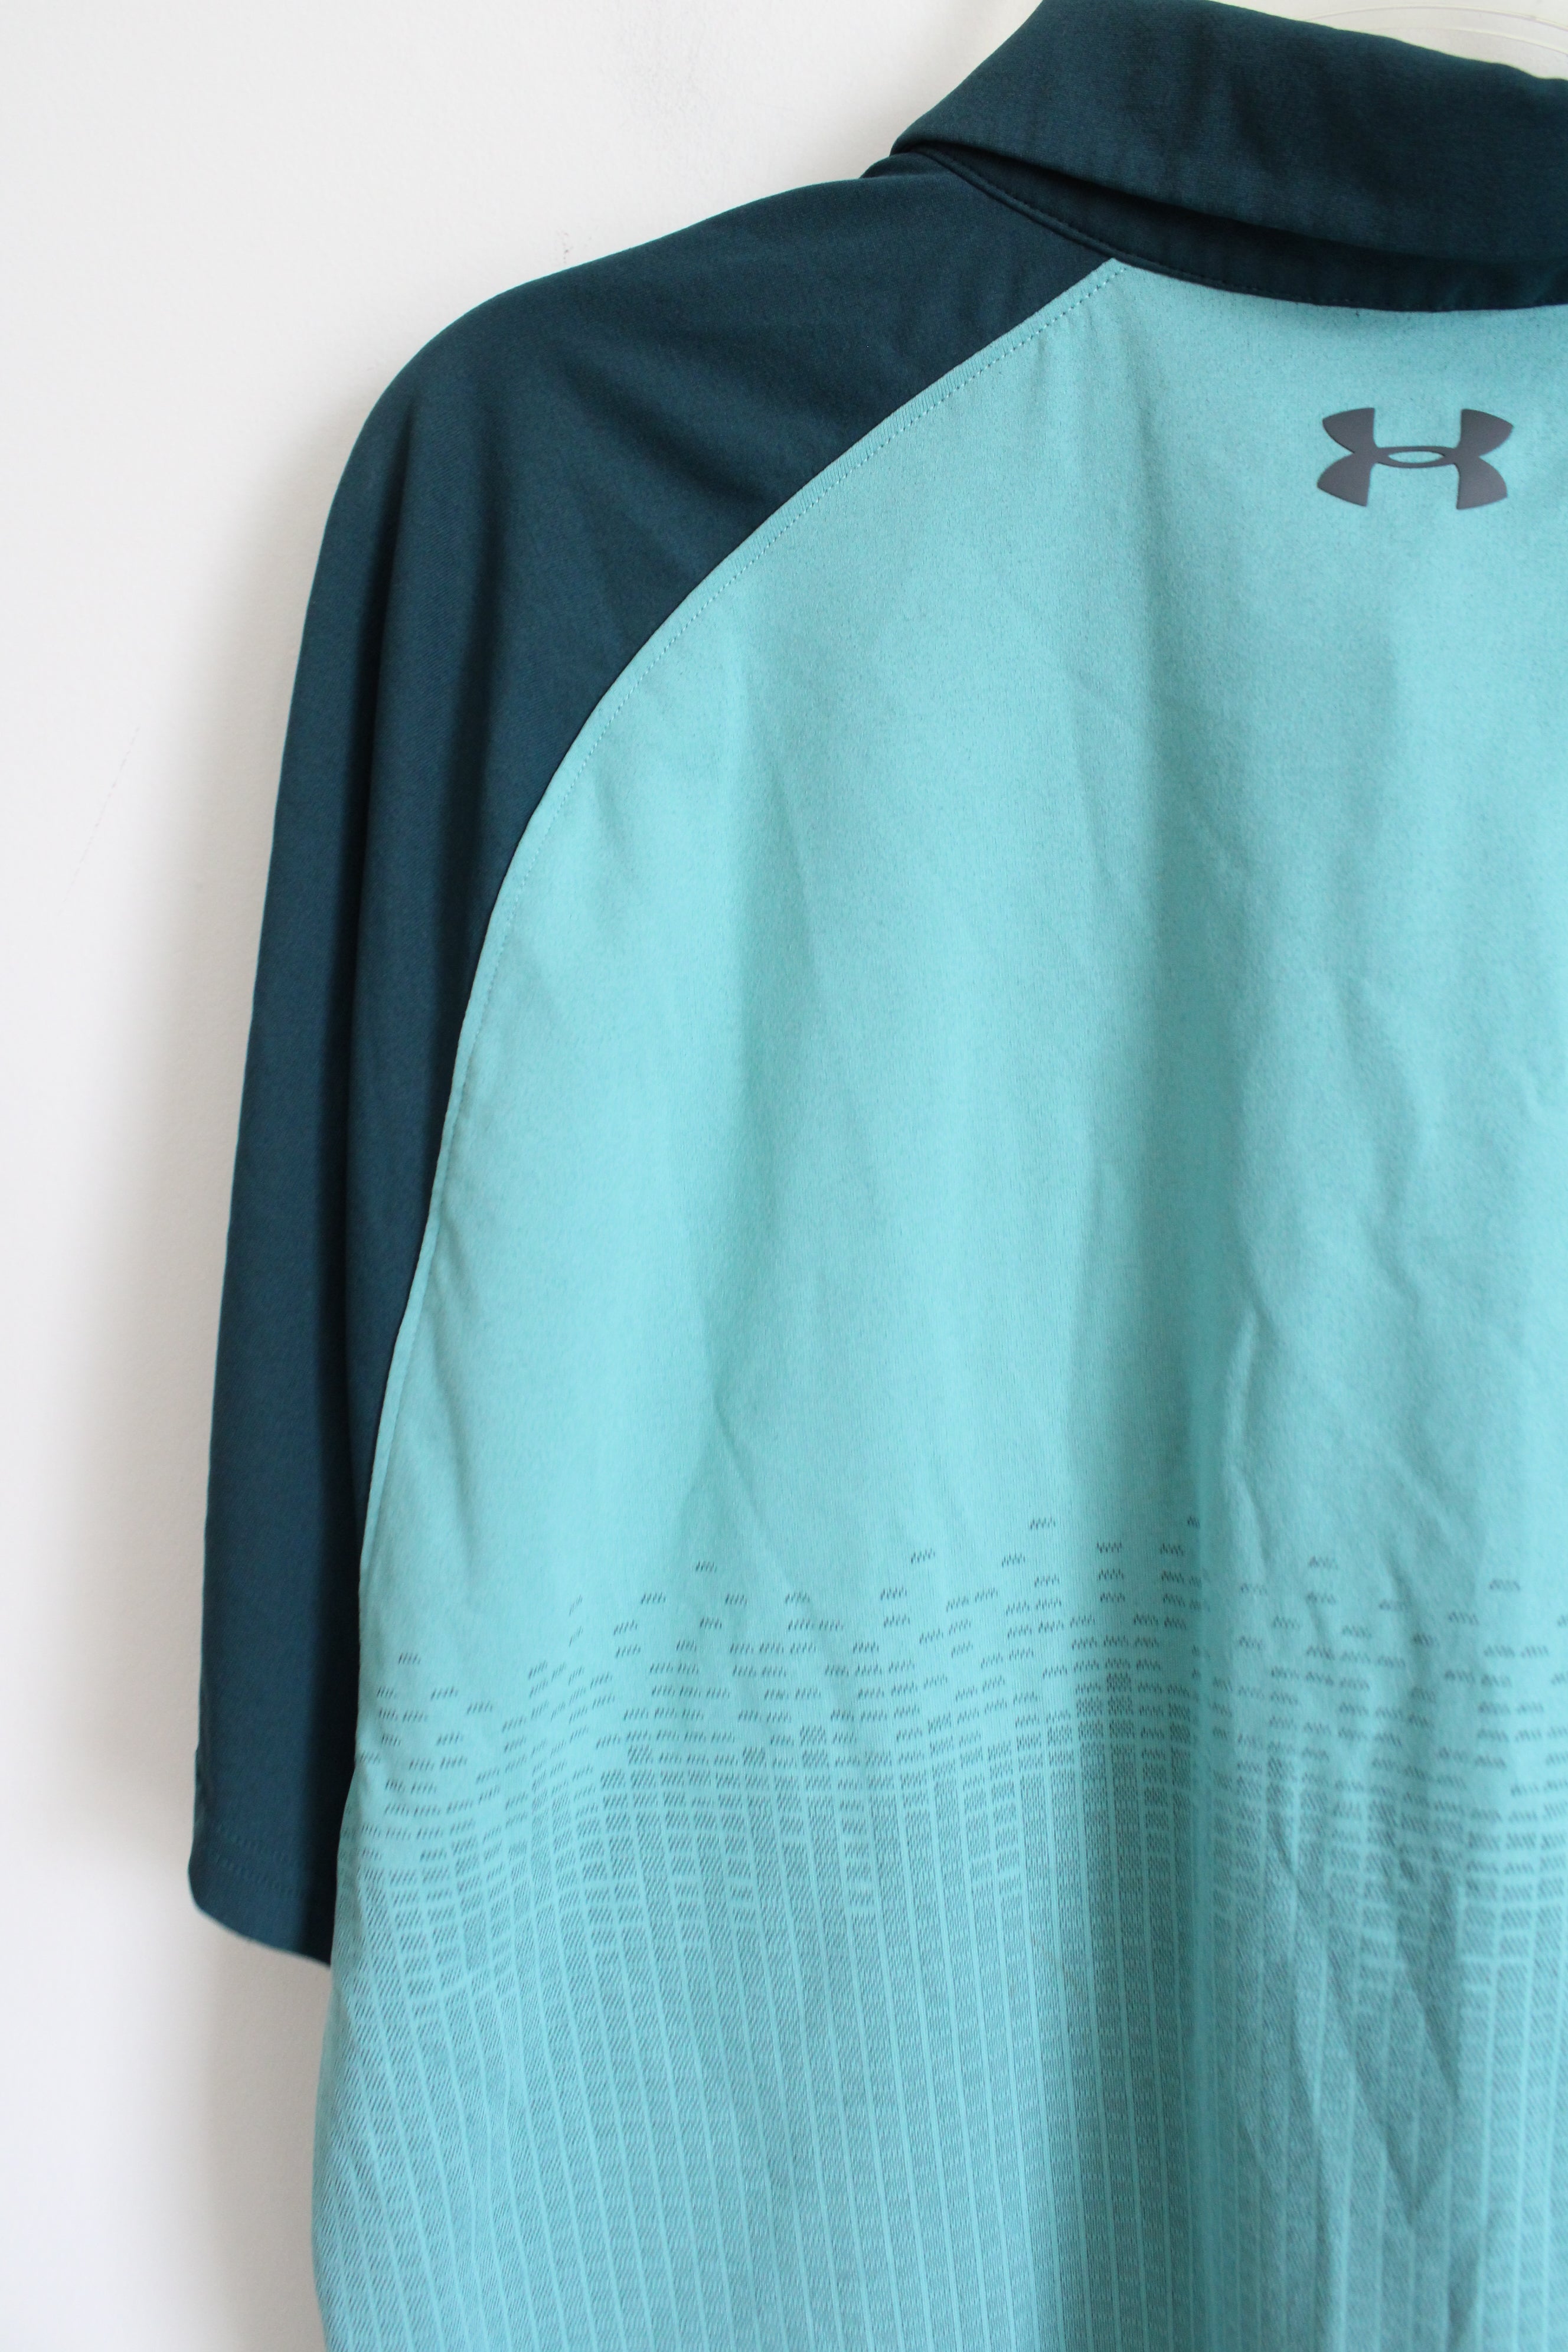 Under Armour Loose Fit Blue Teal Shirt | 2XL